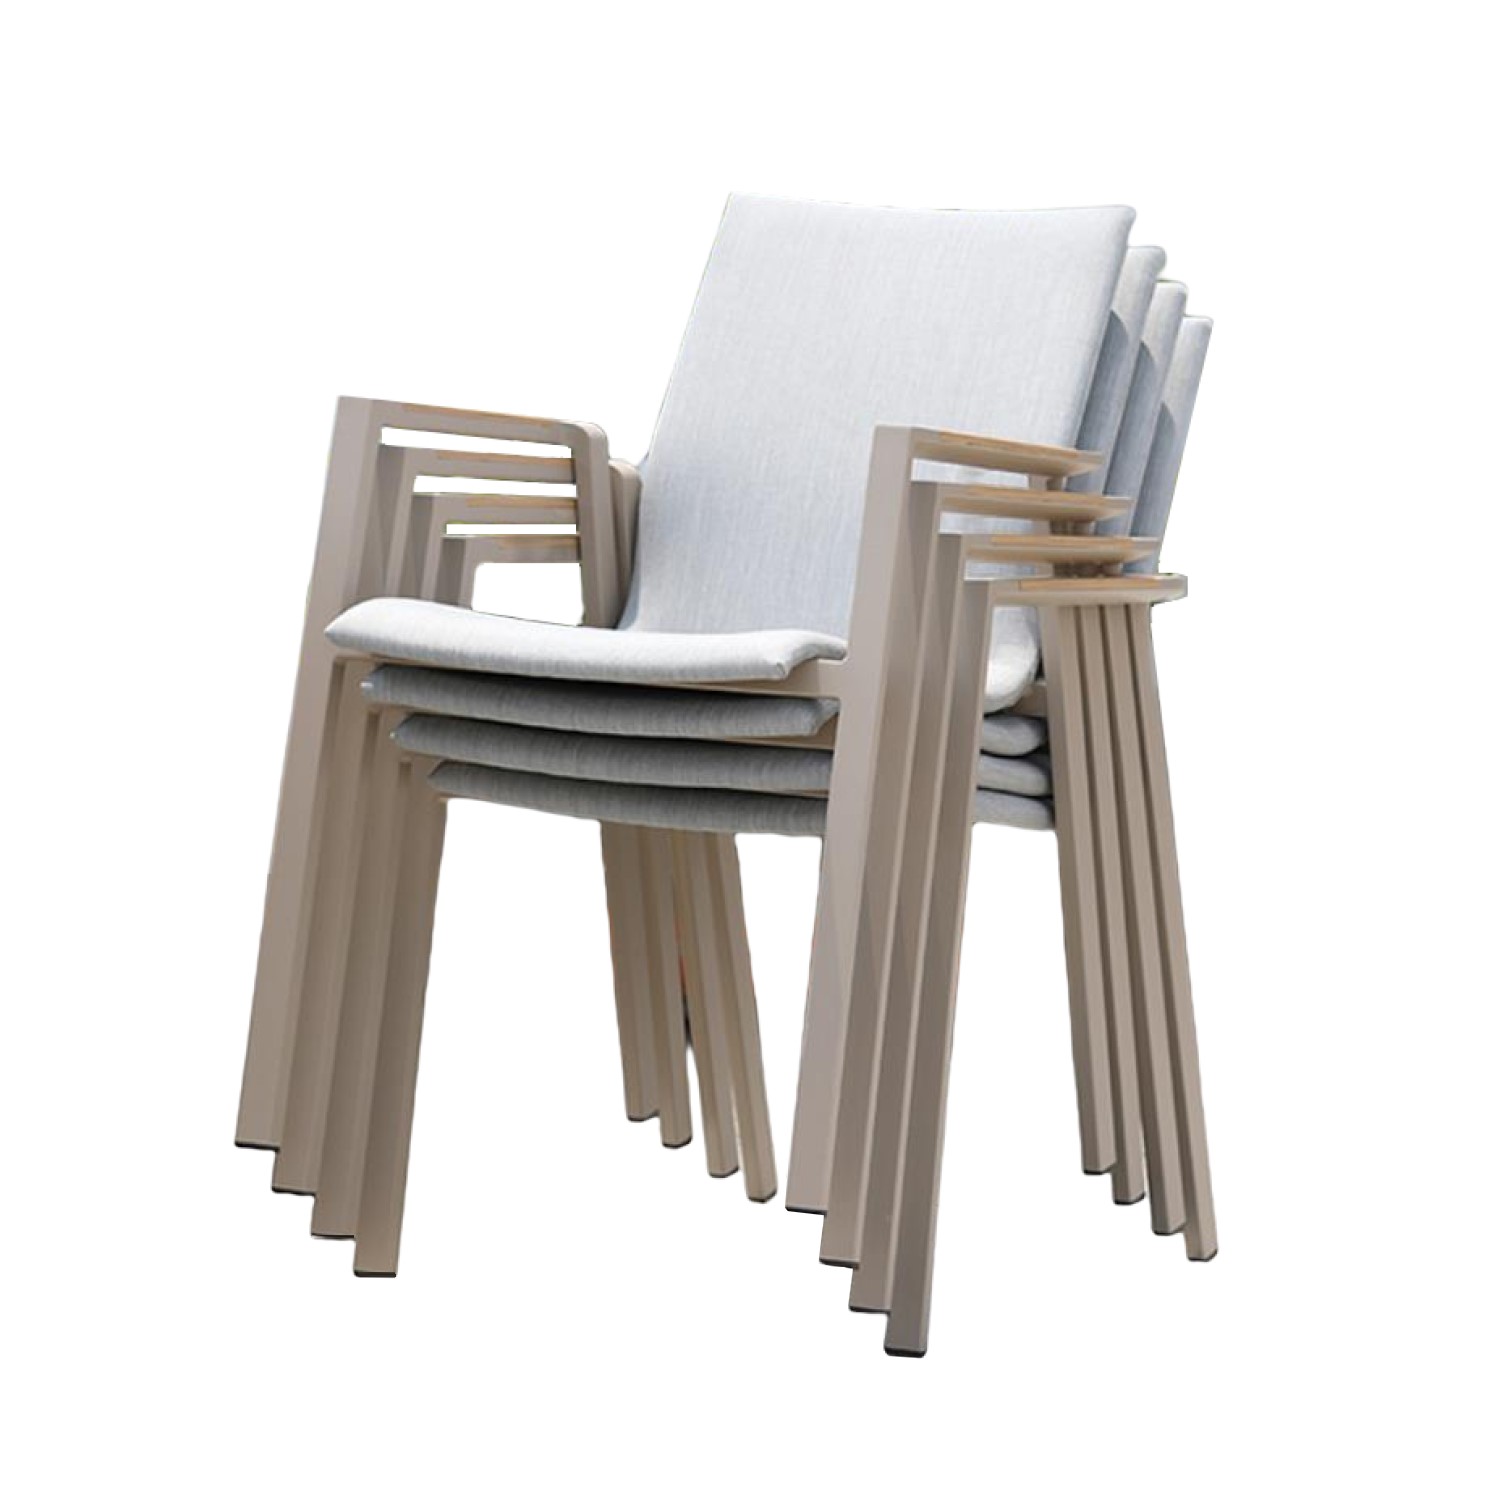 CZ011 Teslin Mesh Aluminum Dining Table Chair Sets Outdoor Dining Set